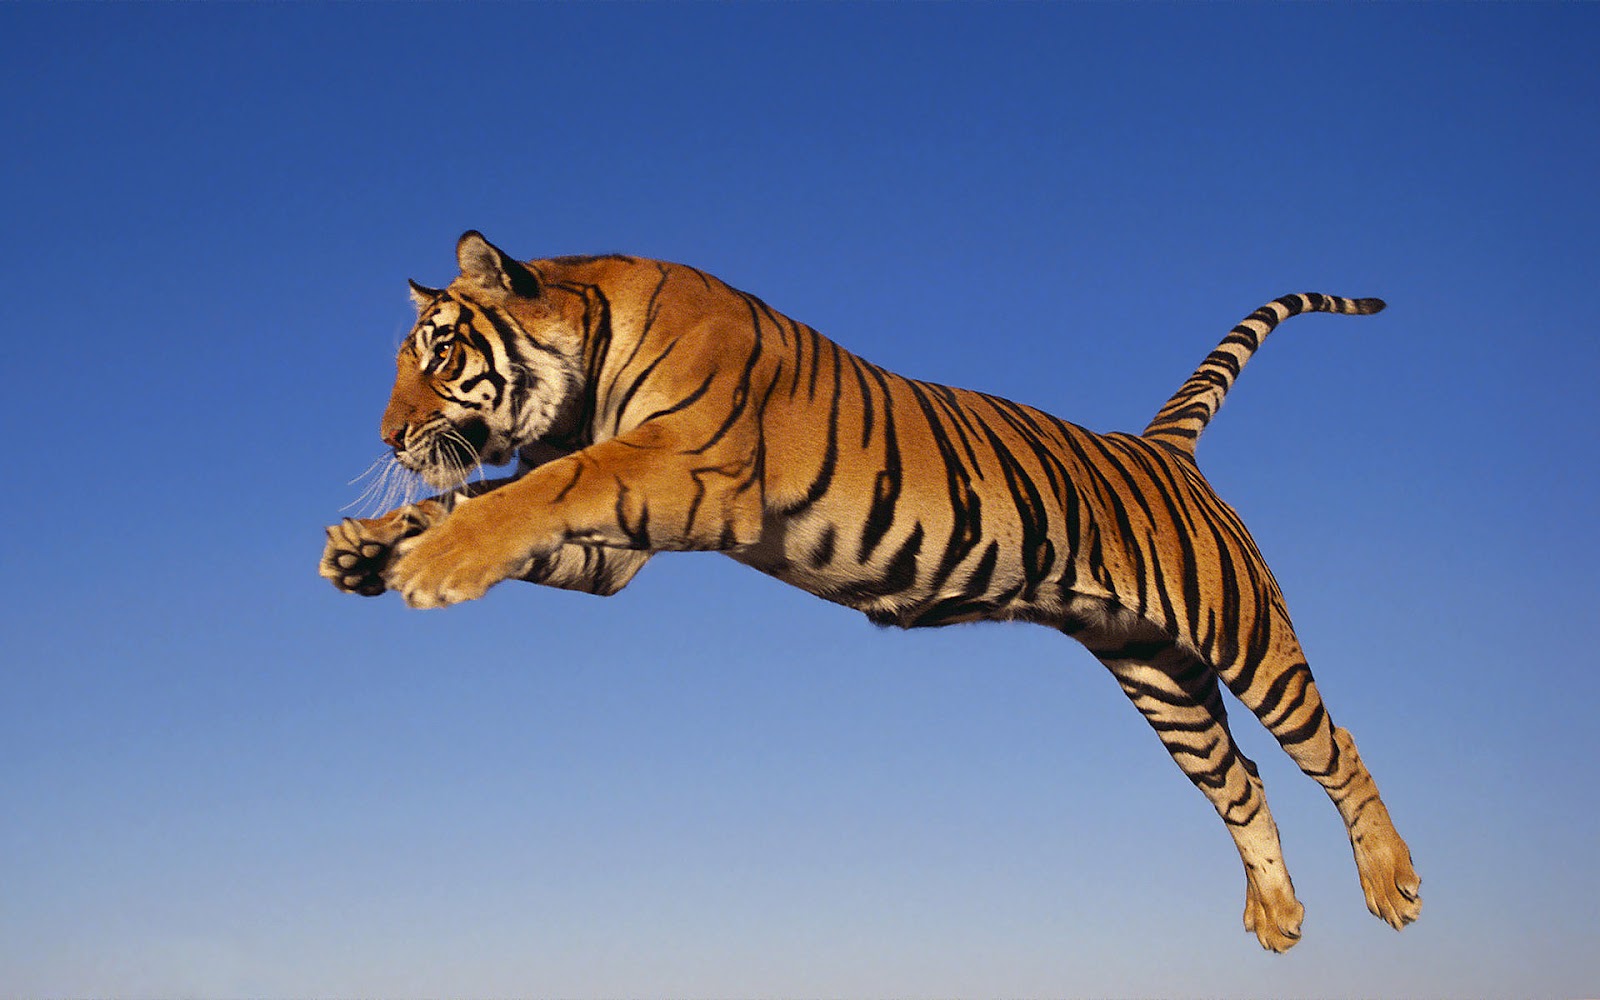  And Attacking Tiger Tigers Wallpaper 1600x1000 Full HD Wallpapers 1600x1000